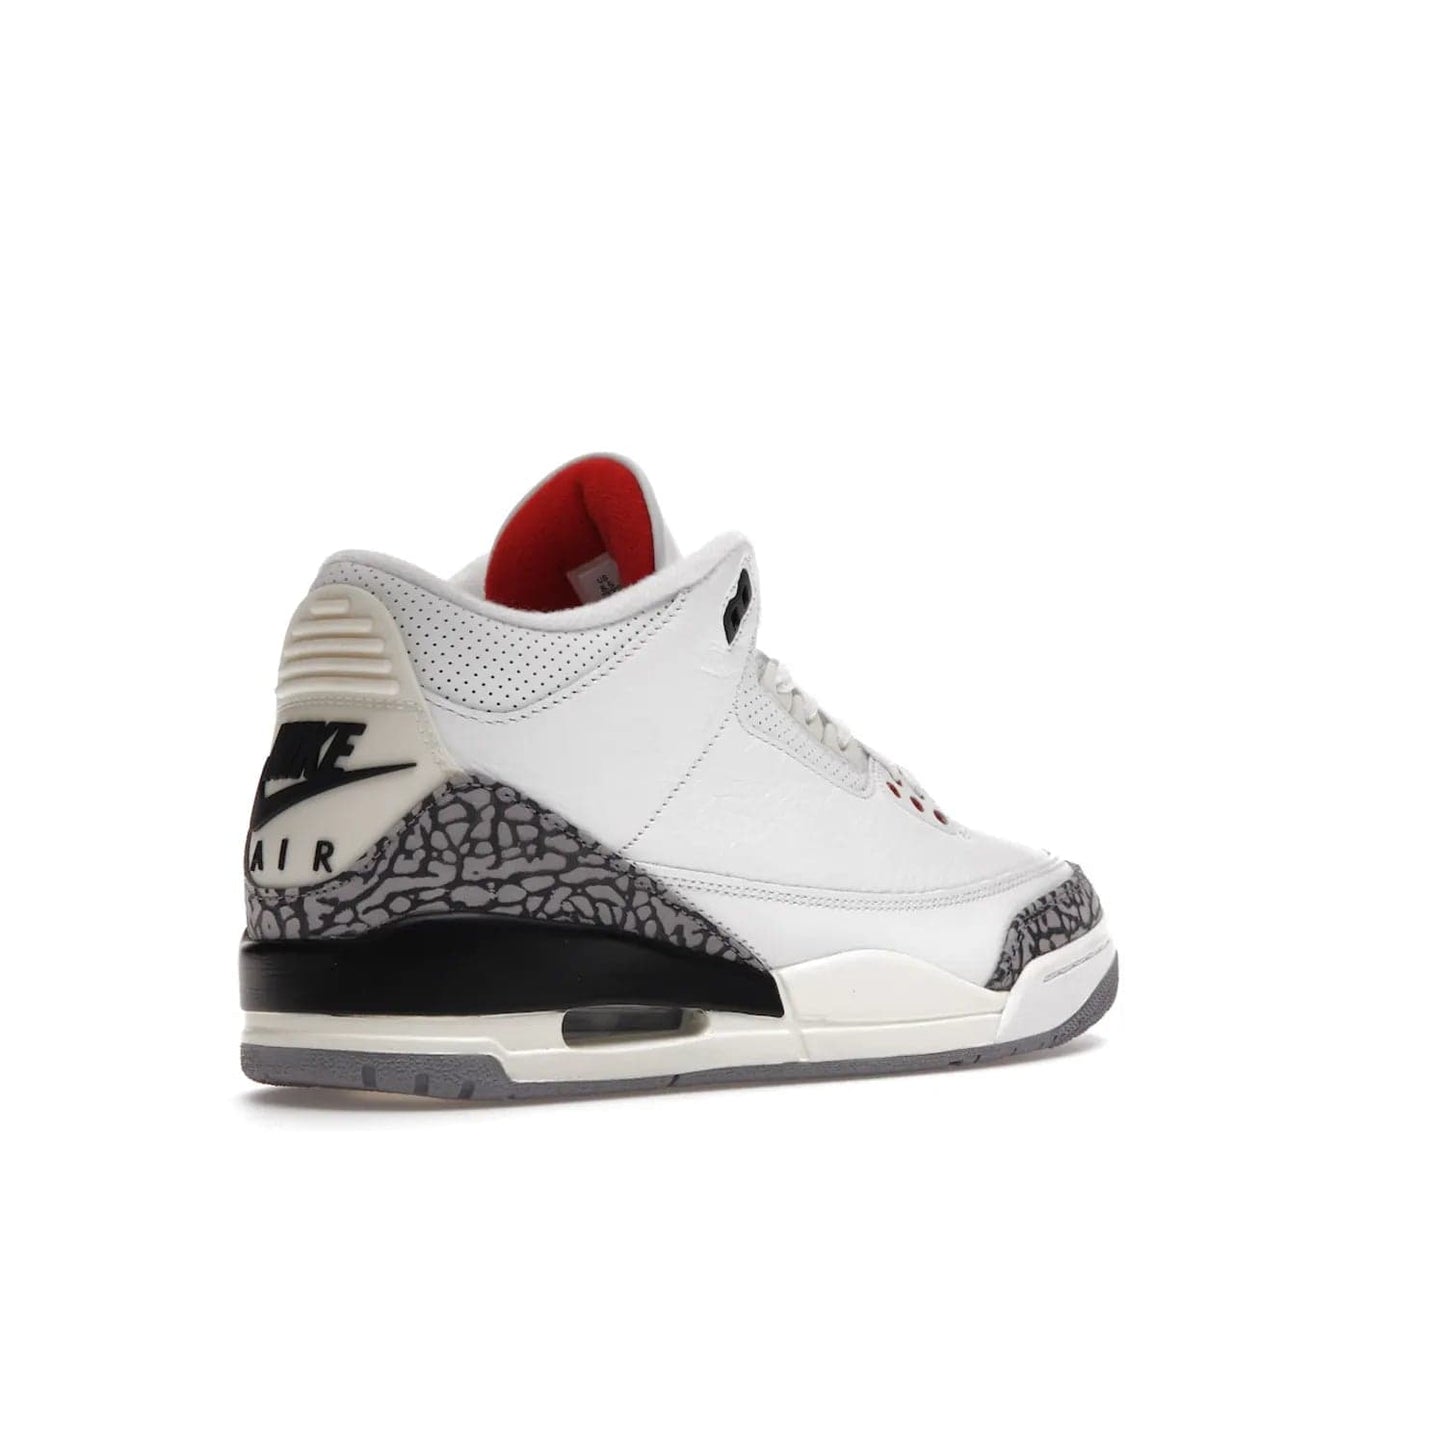 Jordan 3 Retro White Cement Reimagined - Image 33 - Only at www.BallersClubKickz.com - The Reimagined Air Jordan 3 Retro in a Summit White/Fire Red/Black/Cement Grey colorway is launching on March 11, 2023. Featuring a white leather upper, off-white midsoles and heel tabs, this vintage-look sneaker is a must-have.